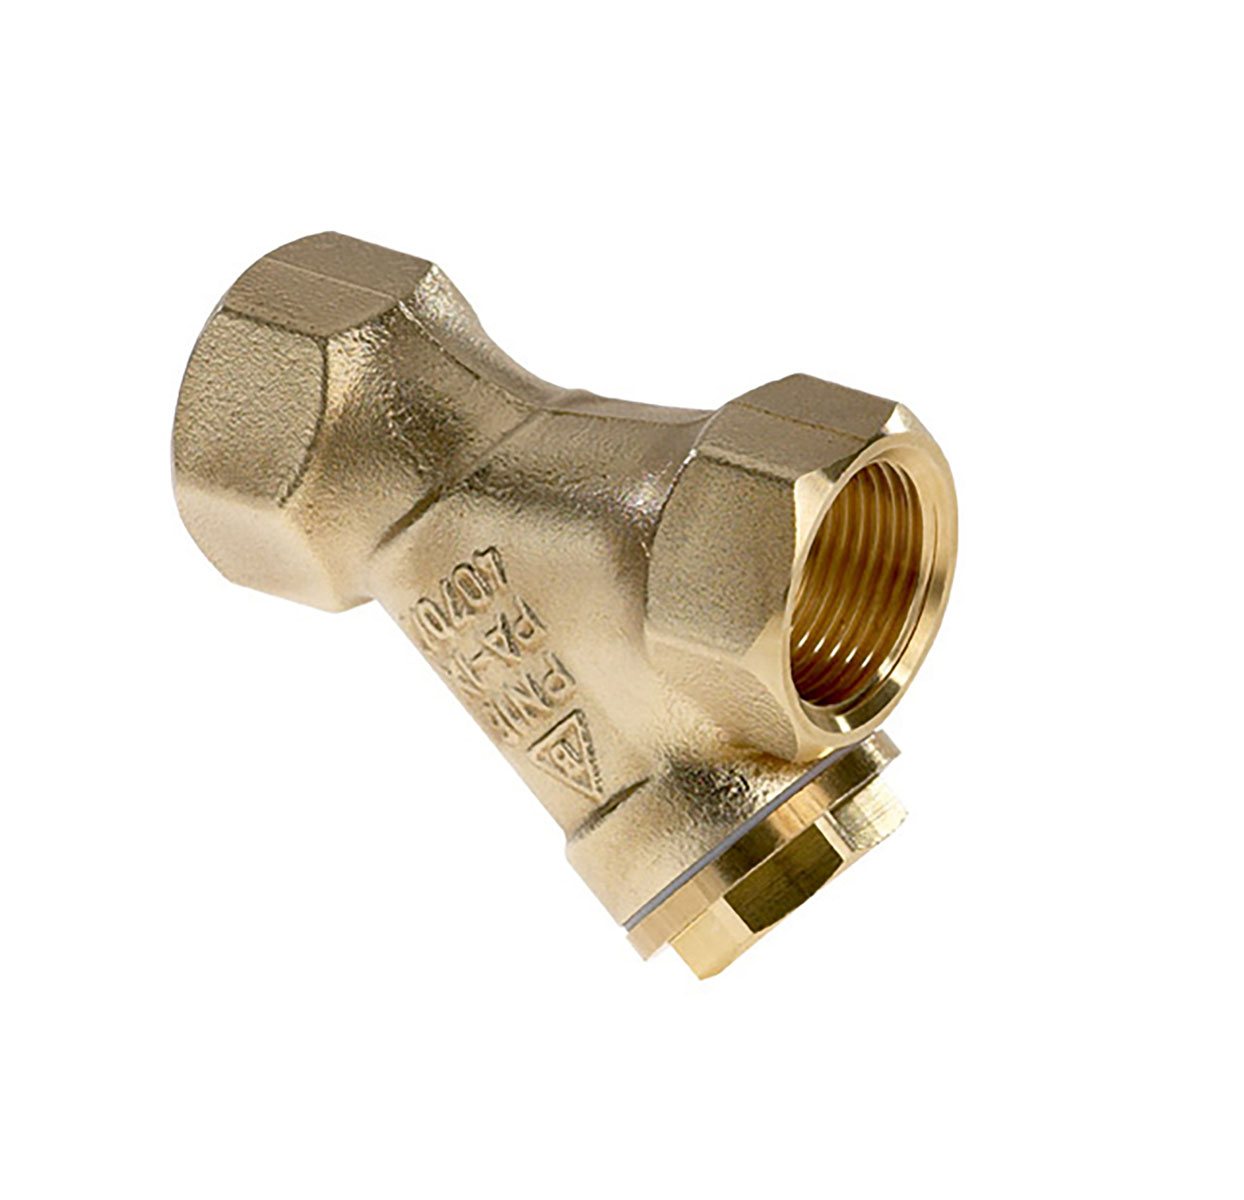 1450320 - CR-Brass Strainer Strainer with PTFE-sealing (Teflon)